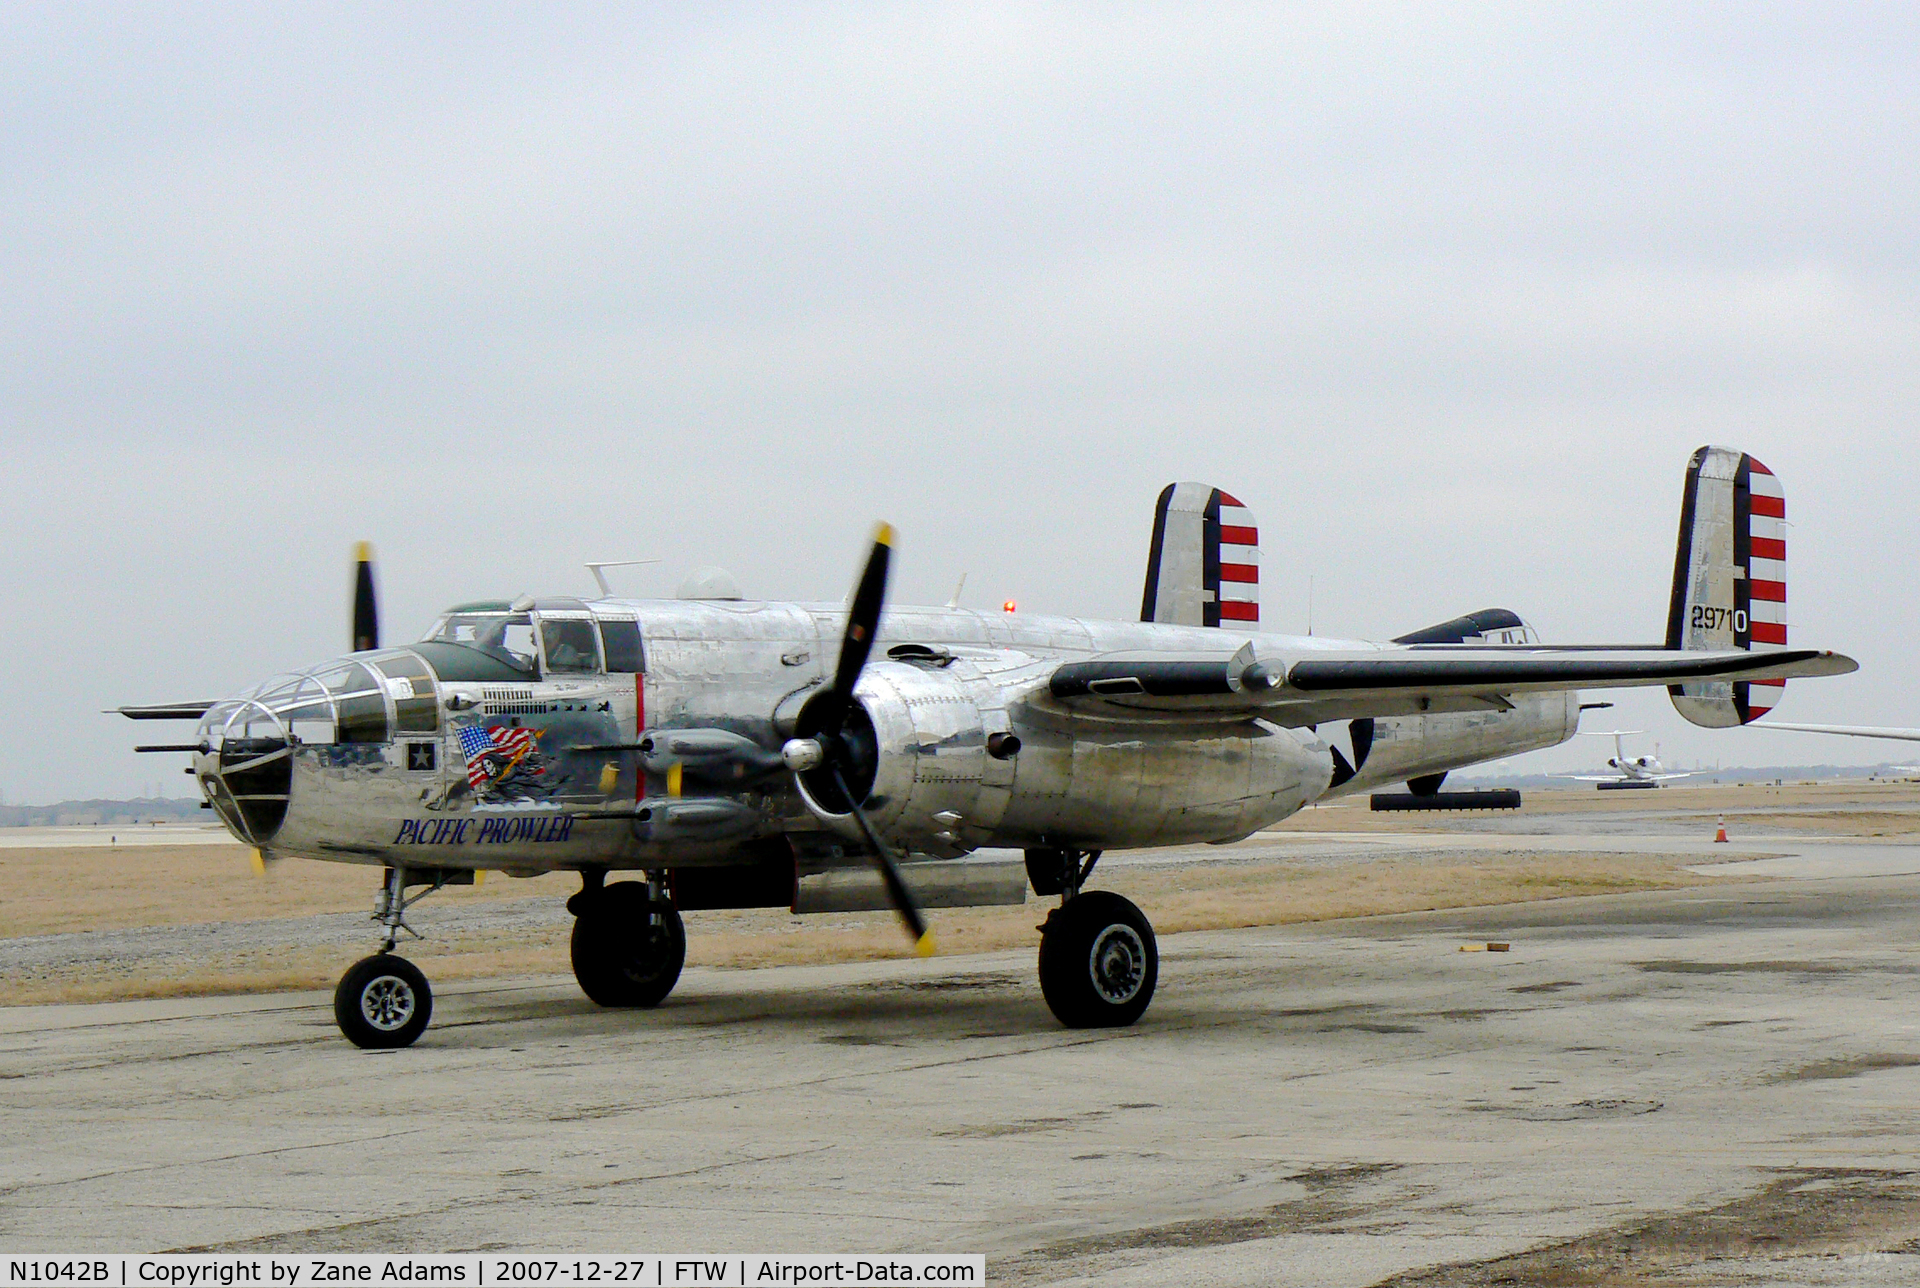 N1042B, 1944 North American B-25N Mitchell C/N 108-35148, At Mecham Field, out for some flight training on a cold winter day!